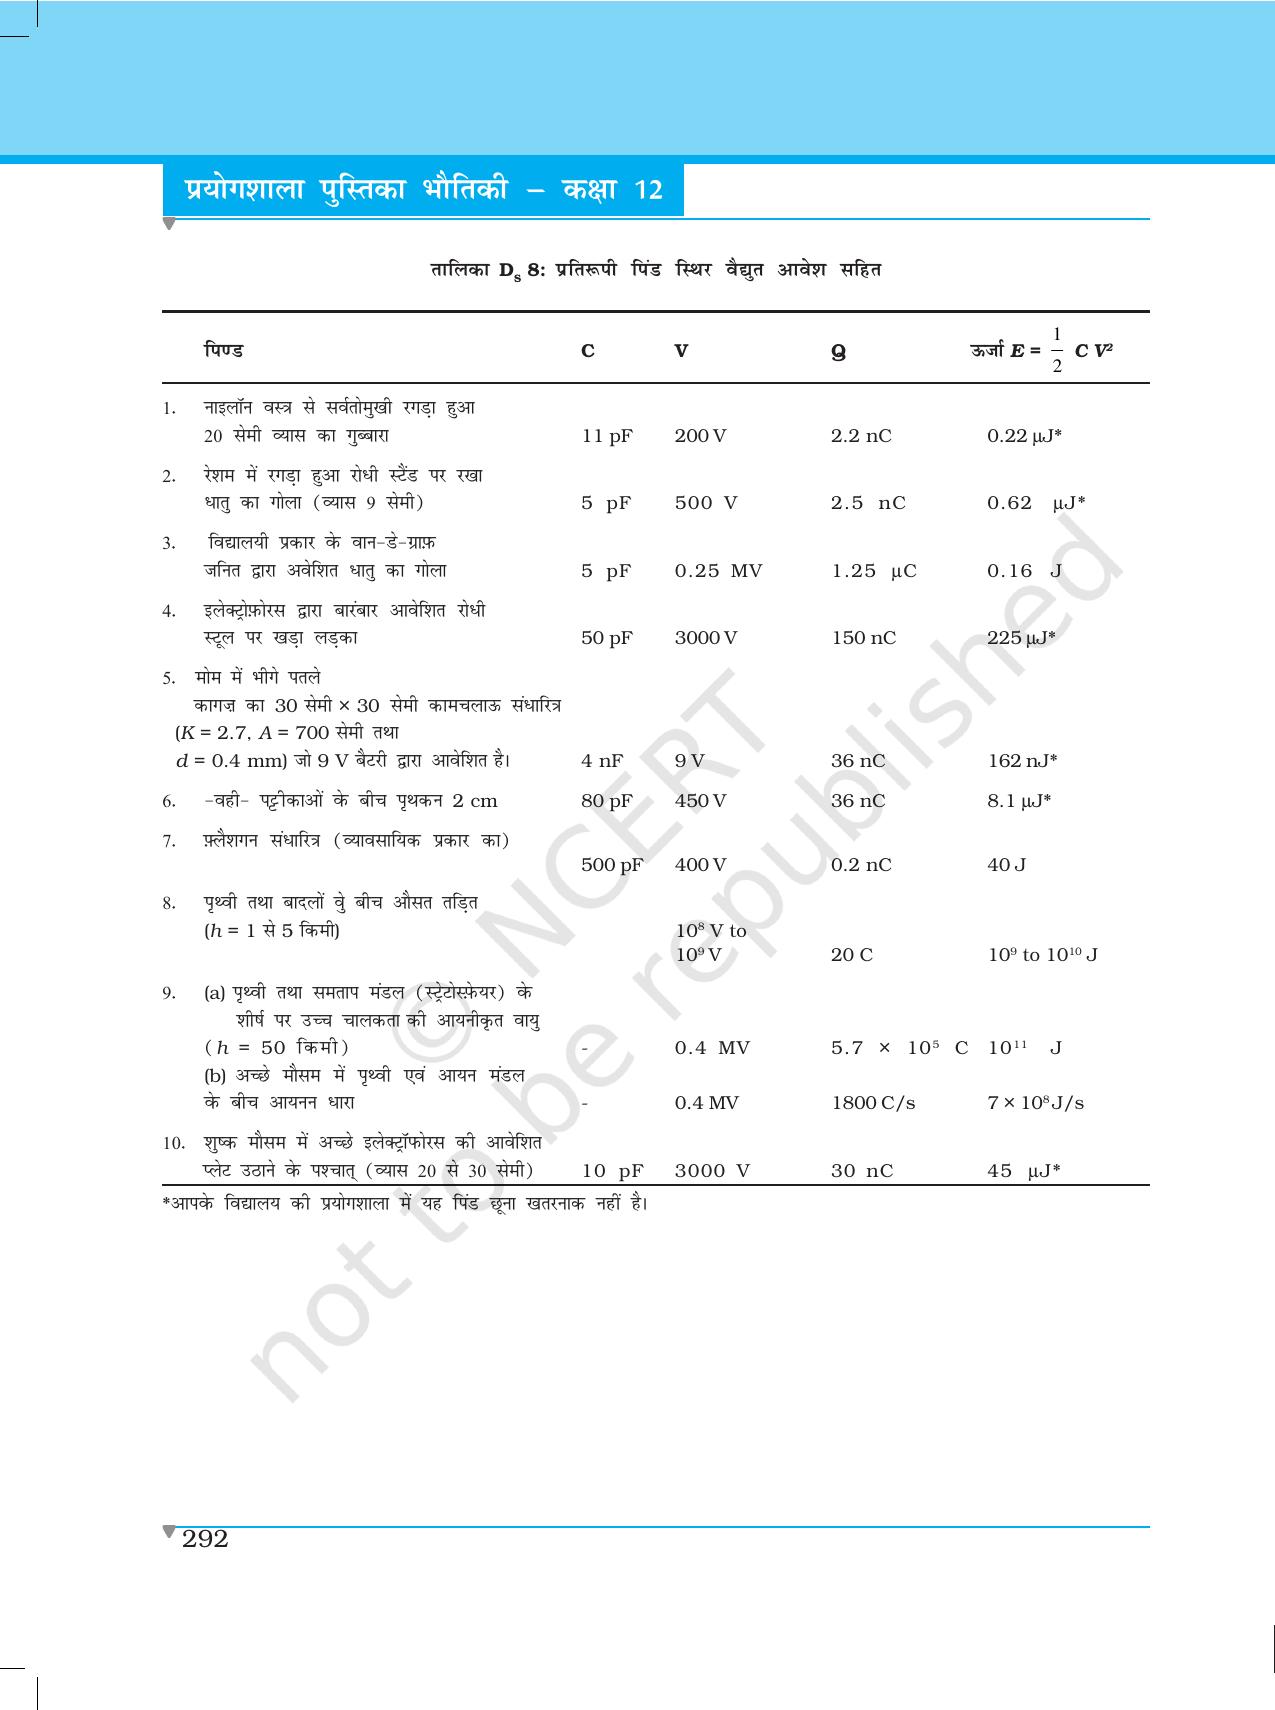 NCERT Laboratory Manuals for Class XII भौतिकी - दत्त अनुभाग - Page 5